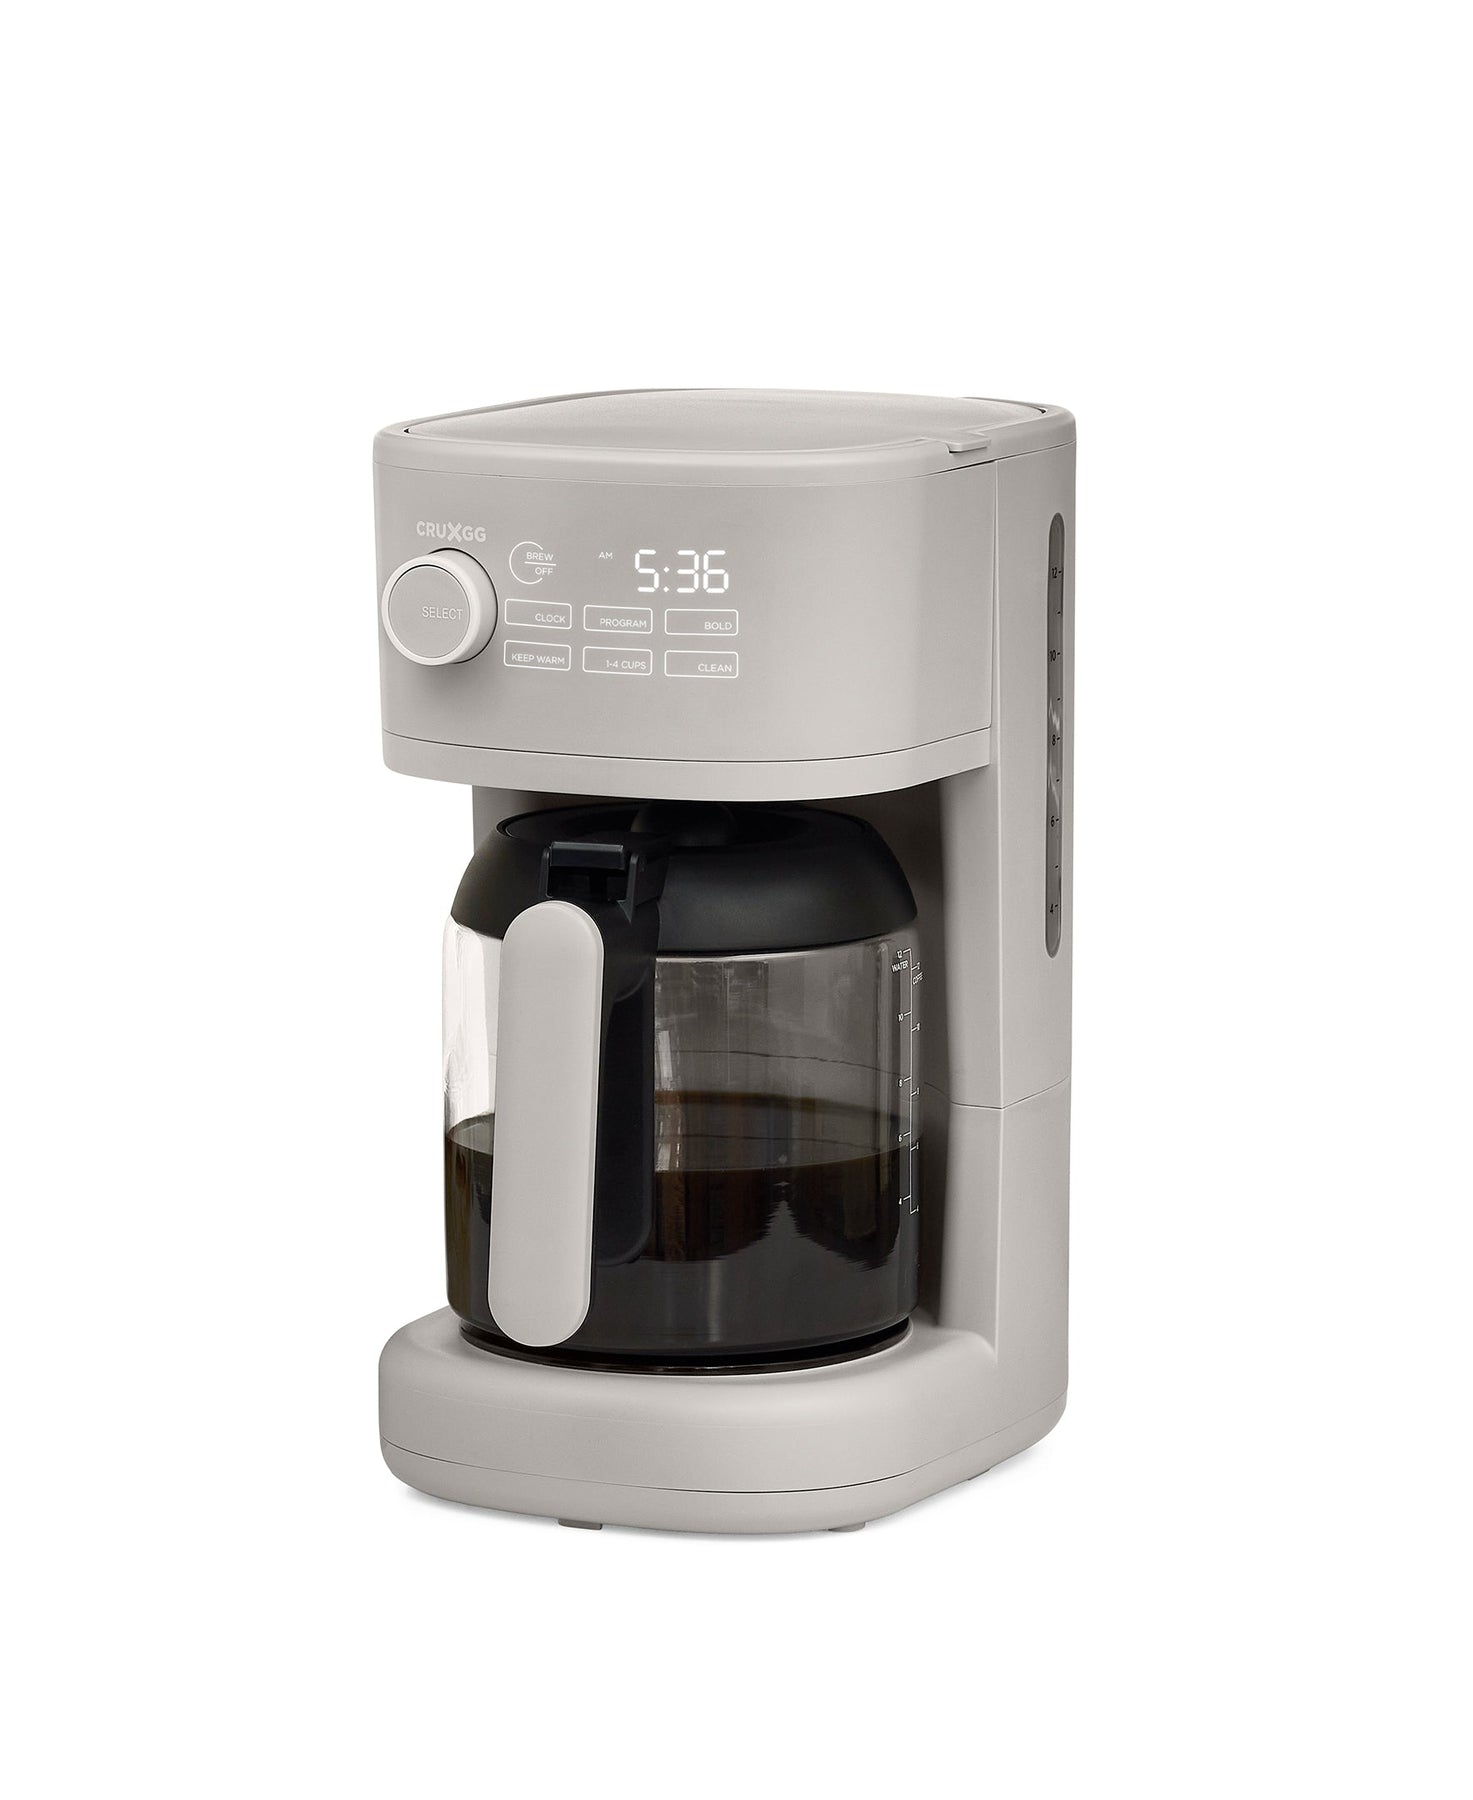  Programmable Coffee Maker, 12 Cups Coffee Pot with